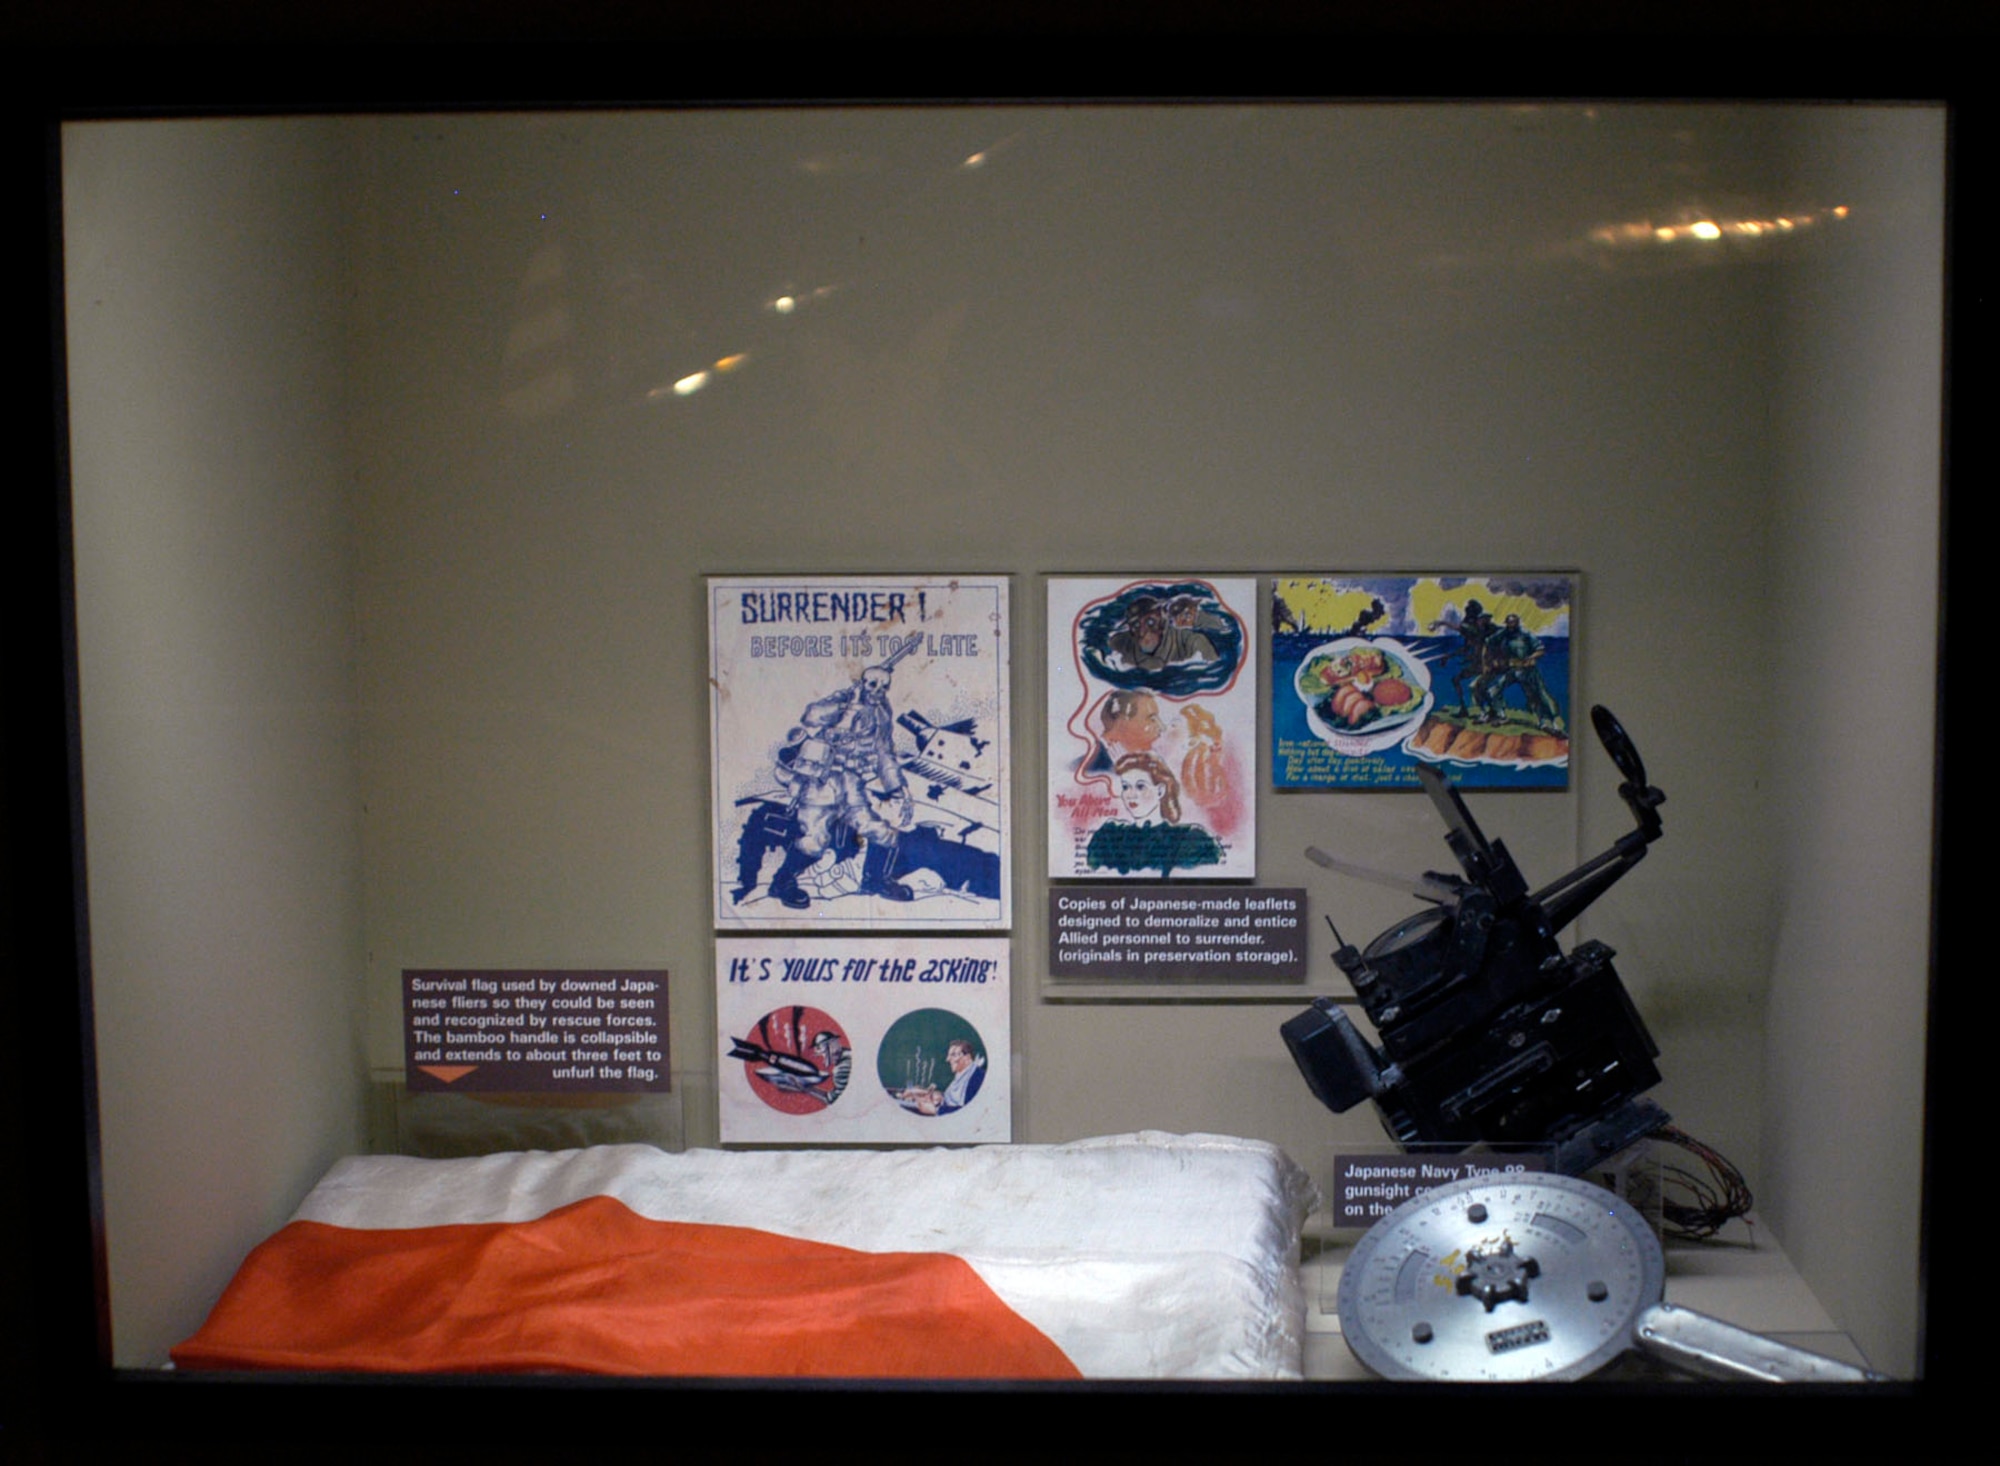 DAYTON, Ohio -- Japanese artifacts, including Japanese-made leaflets, a survival flag used by downed Japanese flyers, and a Japanese gunsight, are on display in the World War II Gallery at the National Museum of the U.S. Air Force. (U.S. Air Force photo)